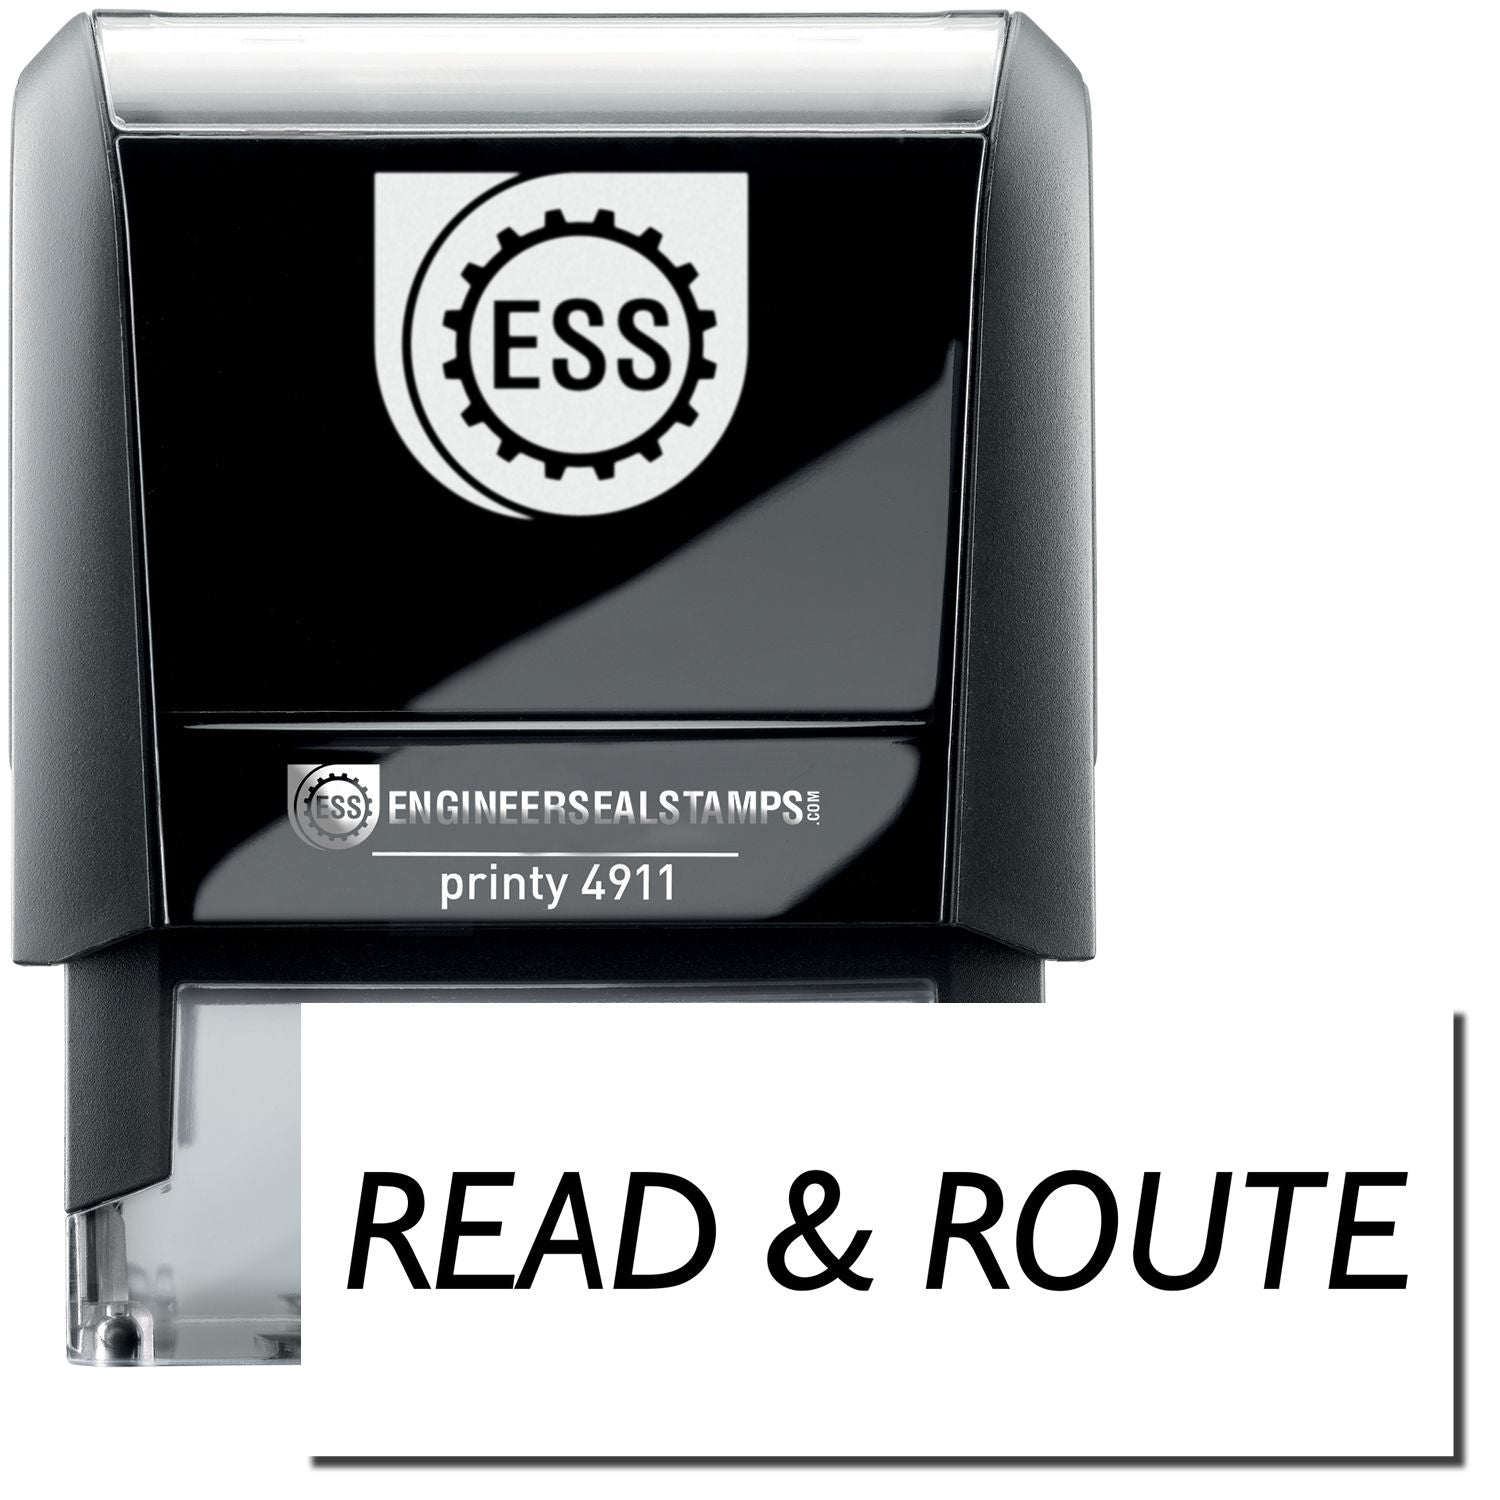 A self-inking stamp with a stamped image showing how the text "READ & ROUTE" is displayed after stamping.